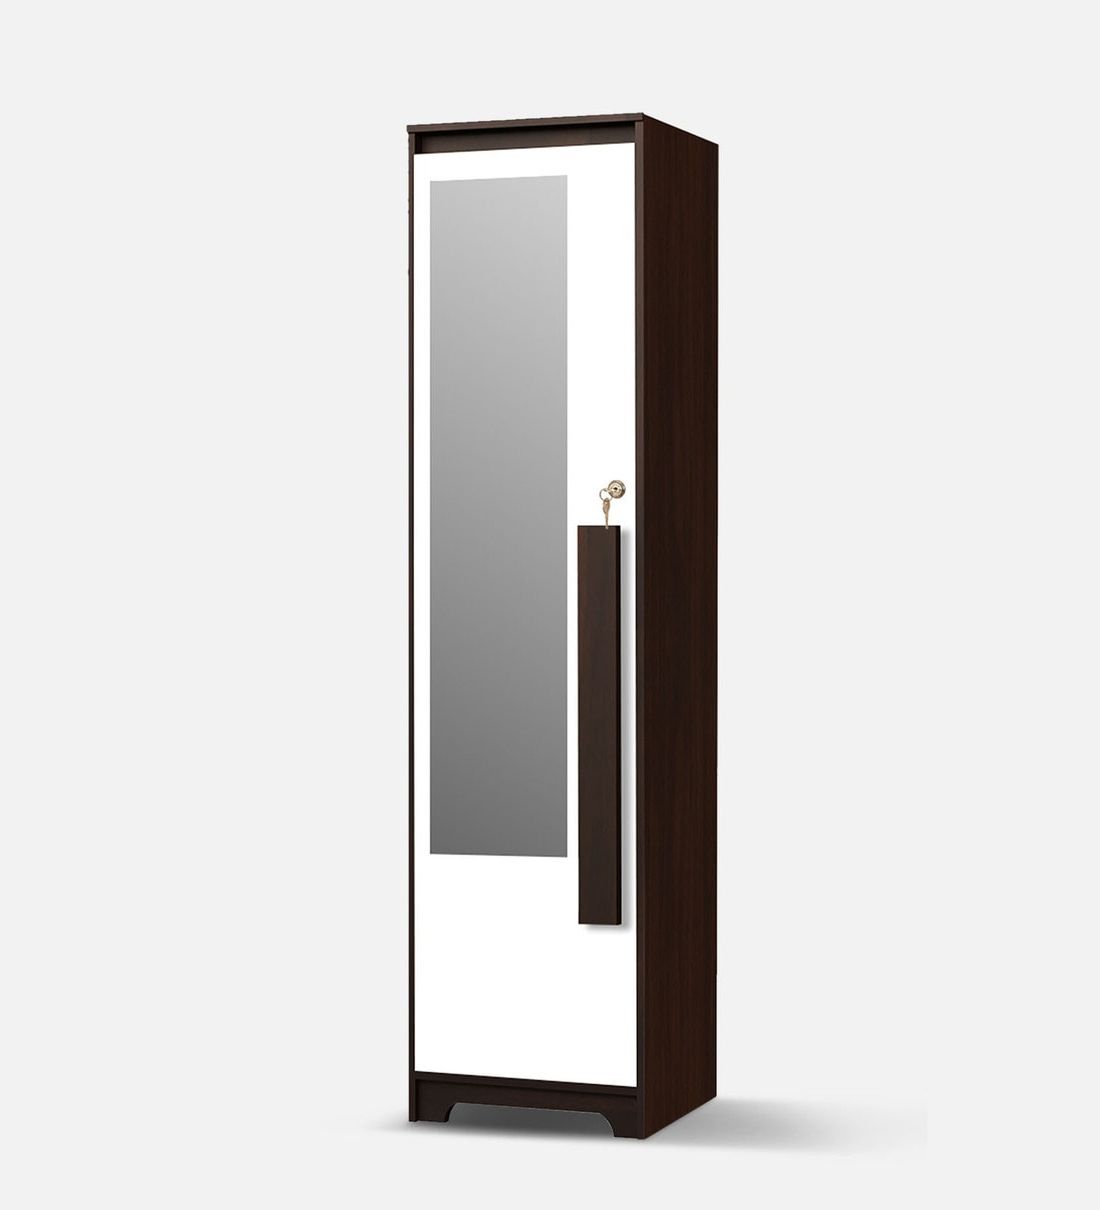 Buy Regal Grand 1 Door Wardrobe In Walnut & White Finish With Mirror At 48%  Offtrevi Furniture | Pepperfry Within 1 Door Mirrored Wardrobes (View 15 of 20)